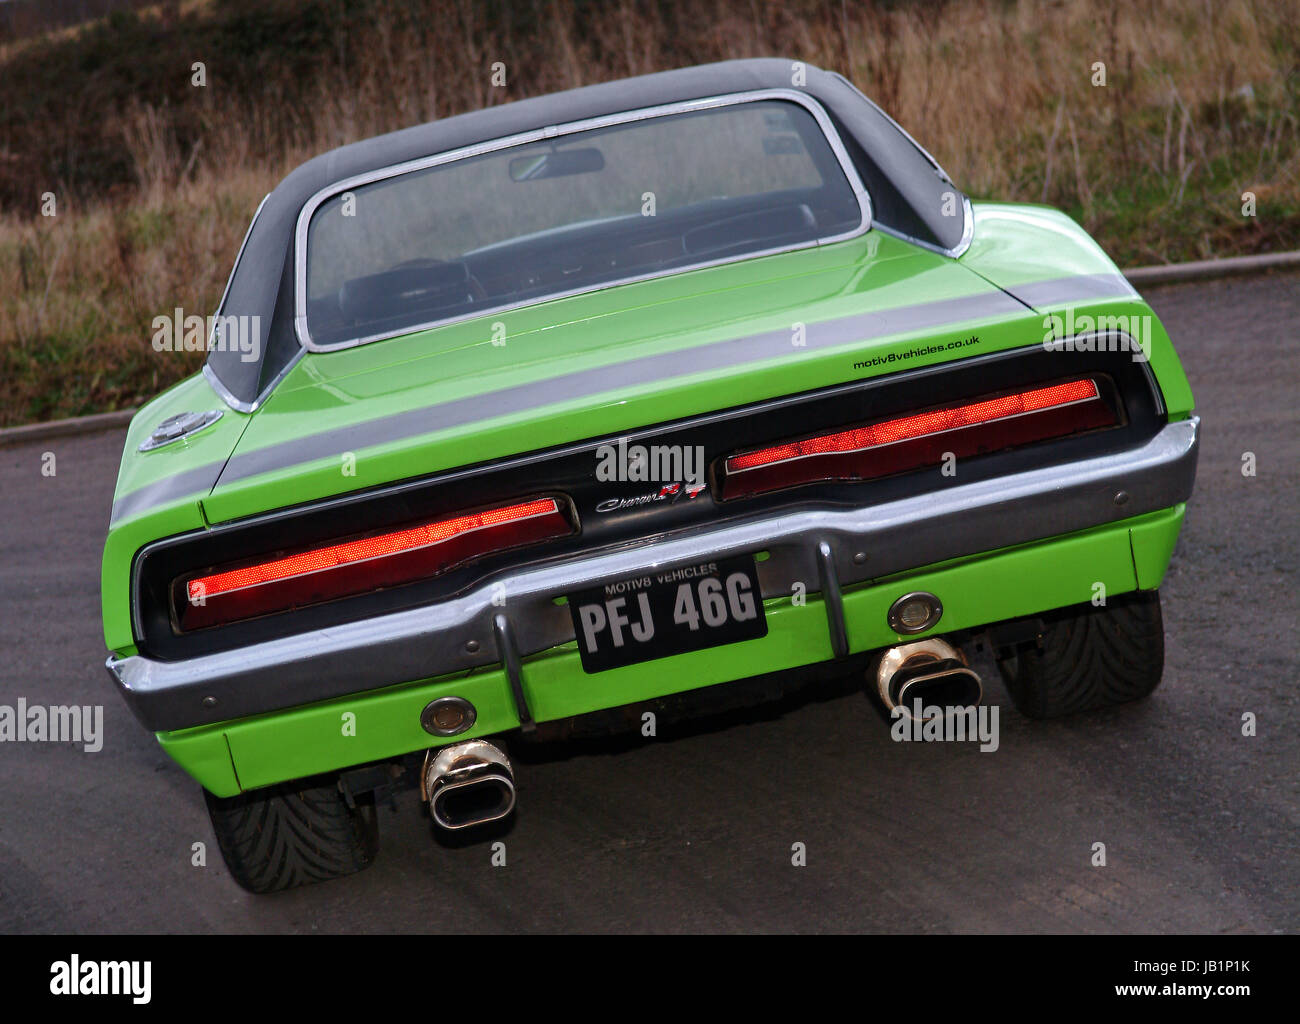 Richard Hammond and his 1969 Dodge Charger 440 R/T Stock Photo